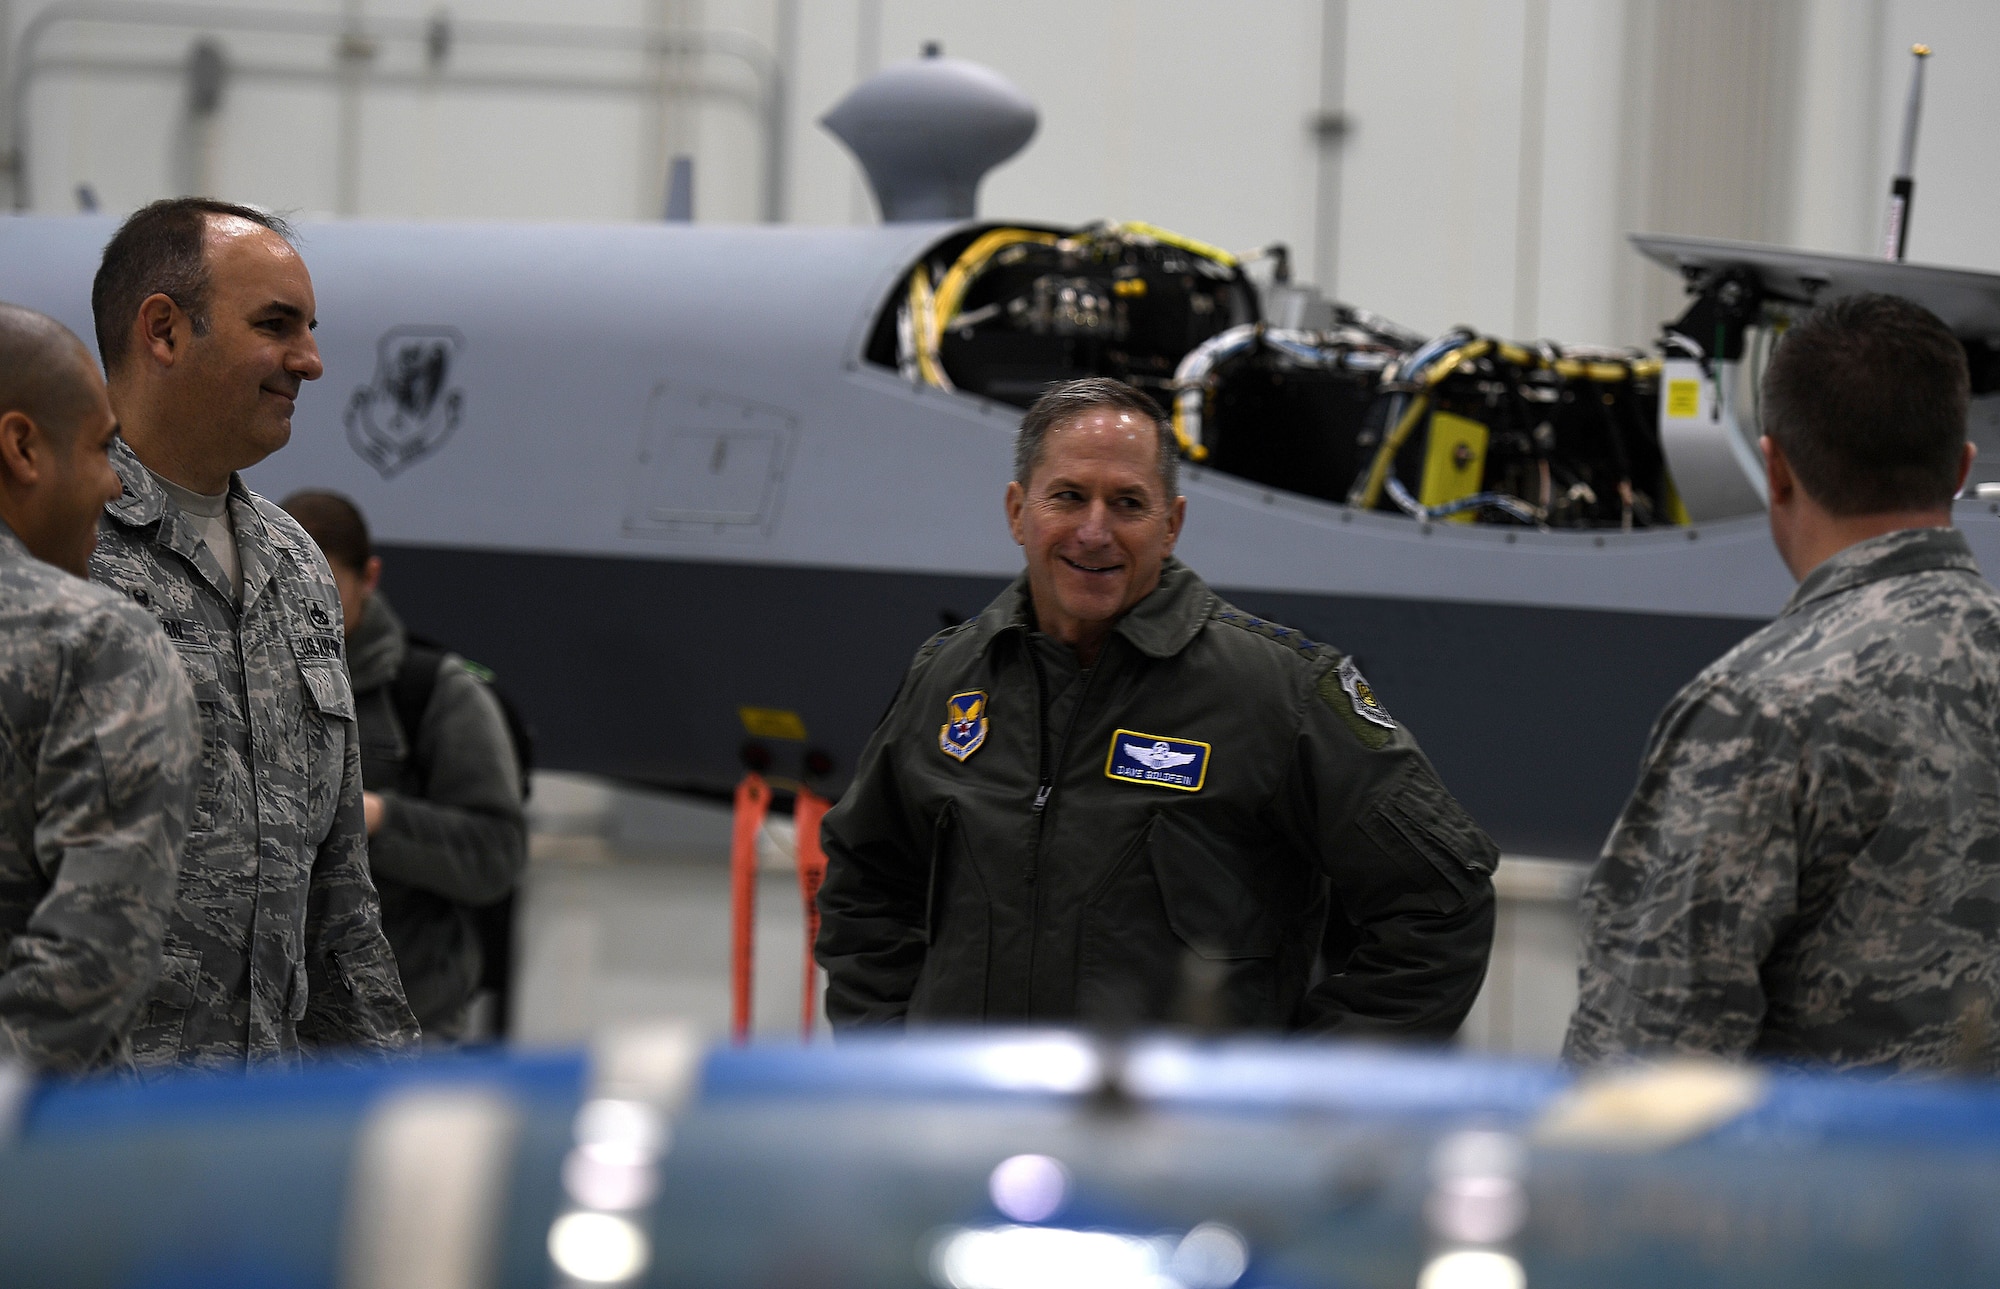 Air Force Chief of Staff Gen. David L. Goldfein speaks to Col. Matthew, 432nd Maintenance Group commander, about the benefits of deploying MQ-9 Reapers in the fight against Islamic State of Iraq and Syria during his visit to Creech Air Force Base, Nev., Jan. 9, 2018. Goldfein visited with the 432nd Wing/432nd Air Expeditionary Wing and 799th Air Base Group Airmen who deliver persistent attack and reconnaissance 24/7/365 against the nation’s enemies. (U.S. Air Force photo/Master Sgt. Nadine Barclay)